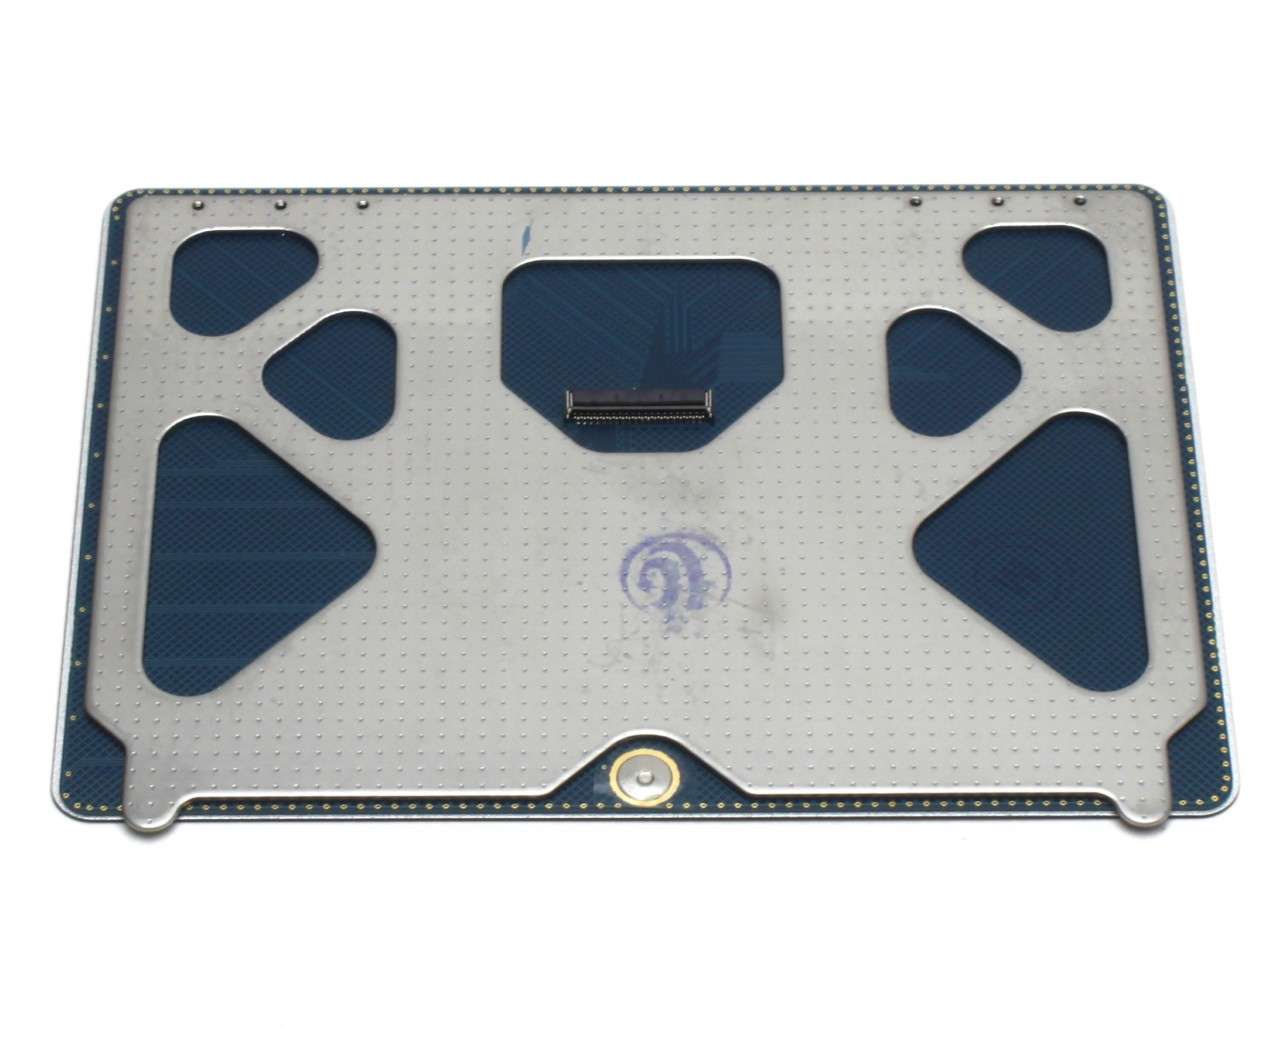 Touchpad Apple Macbook Pro Unibody 13 A1278 Early 2011 Trackpad